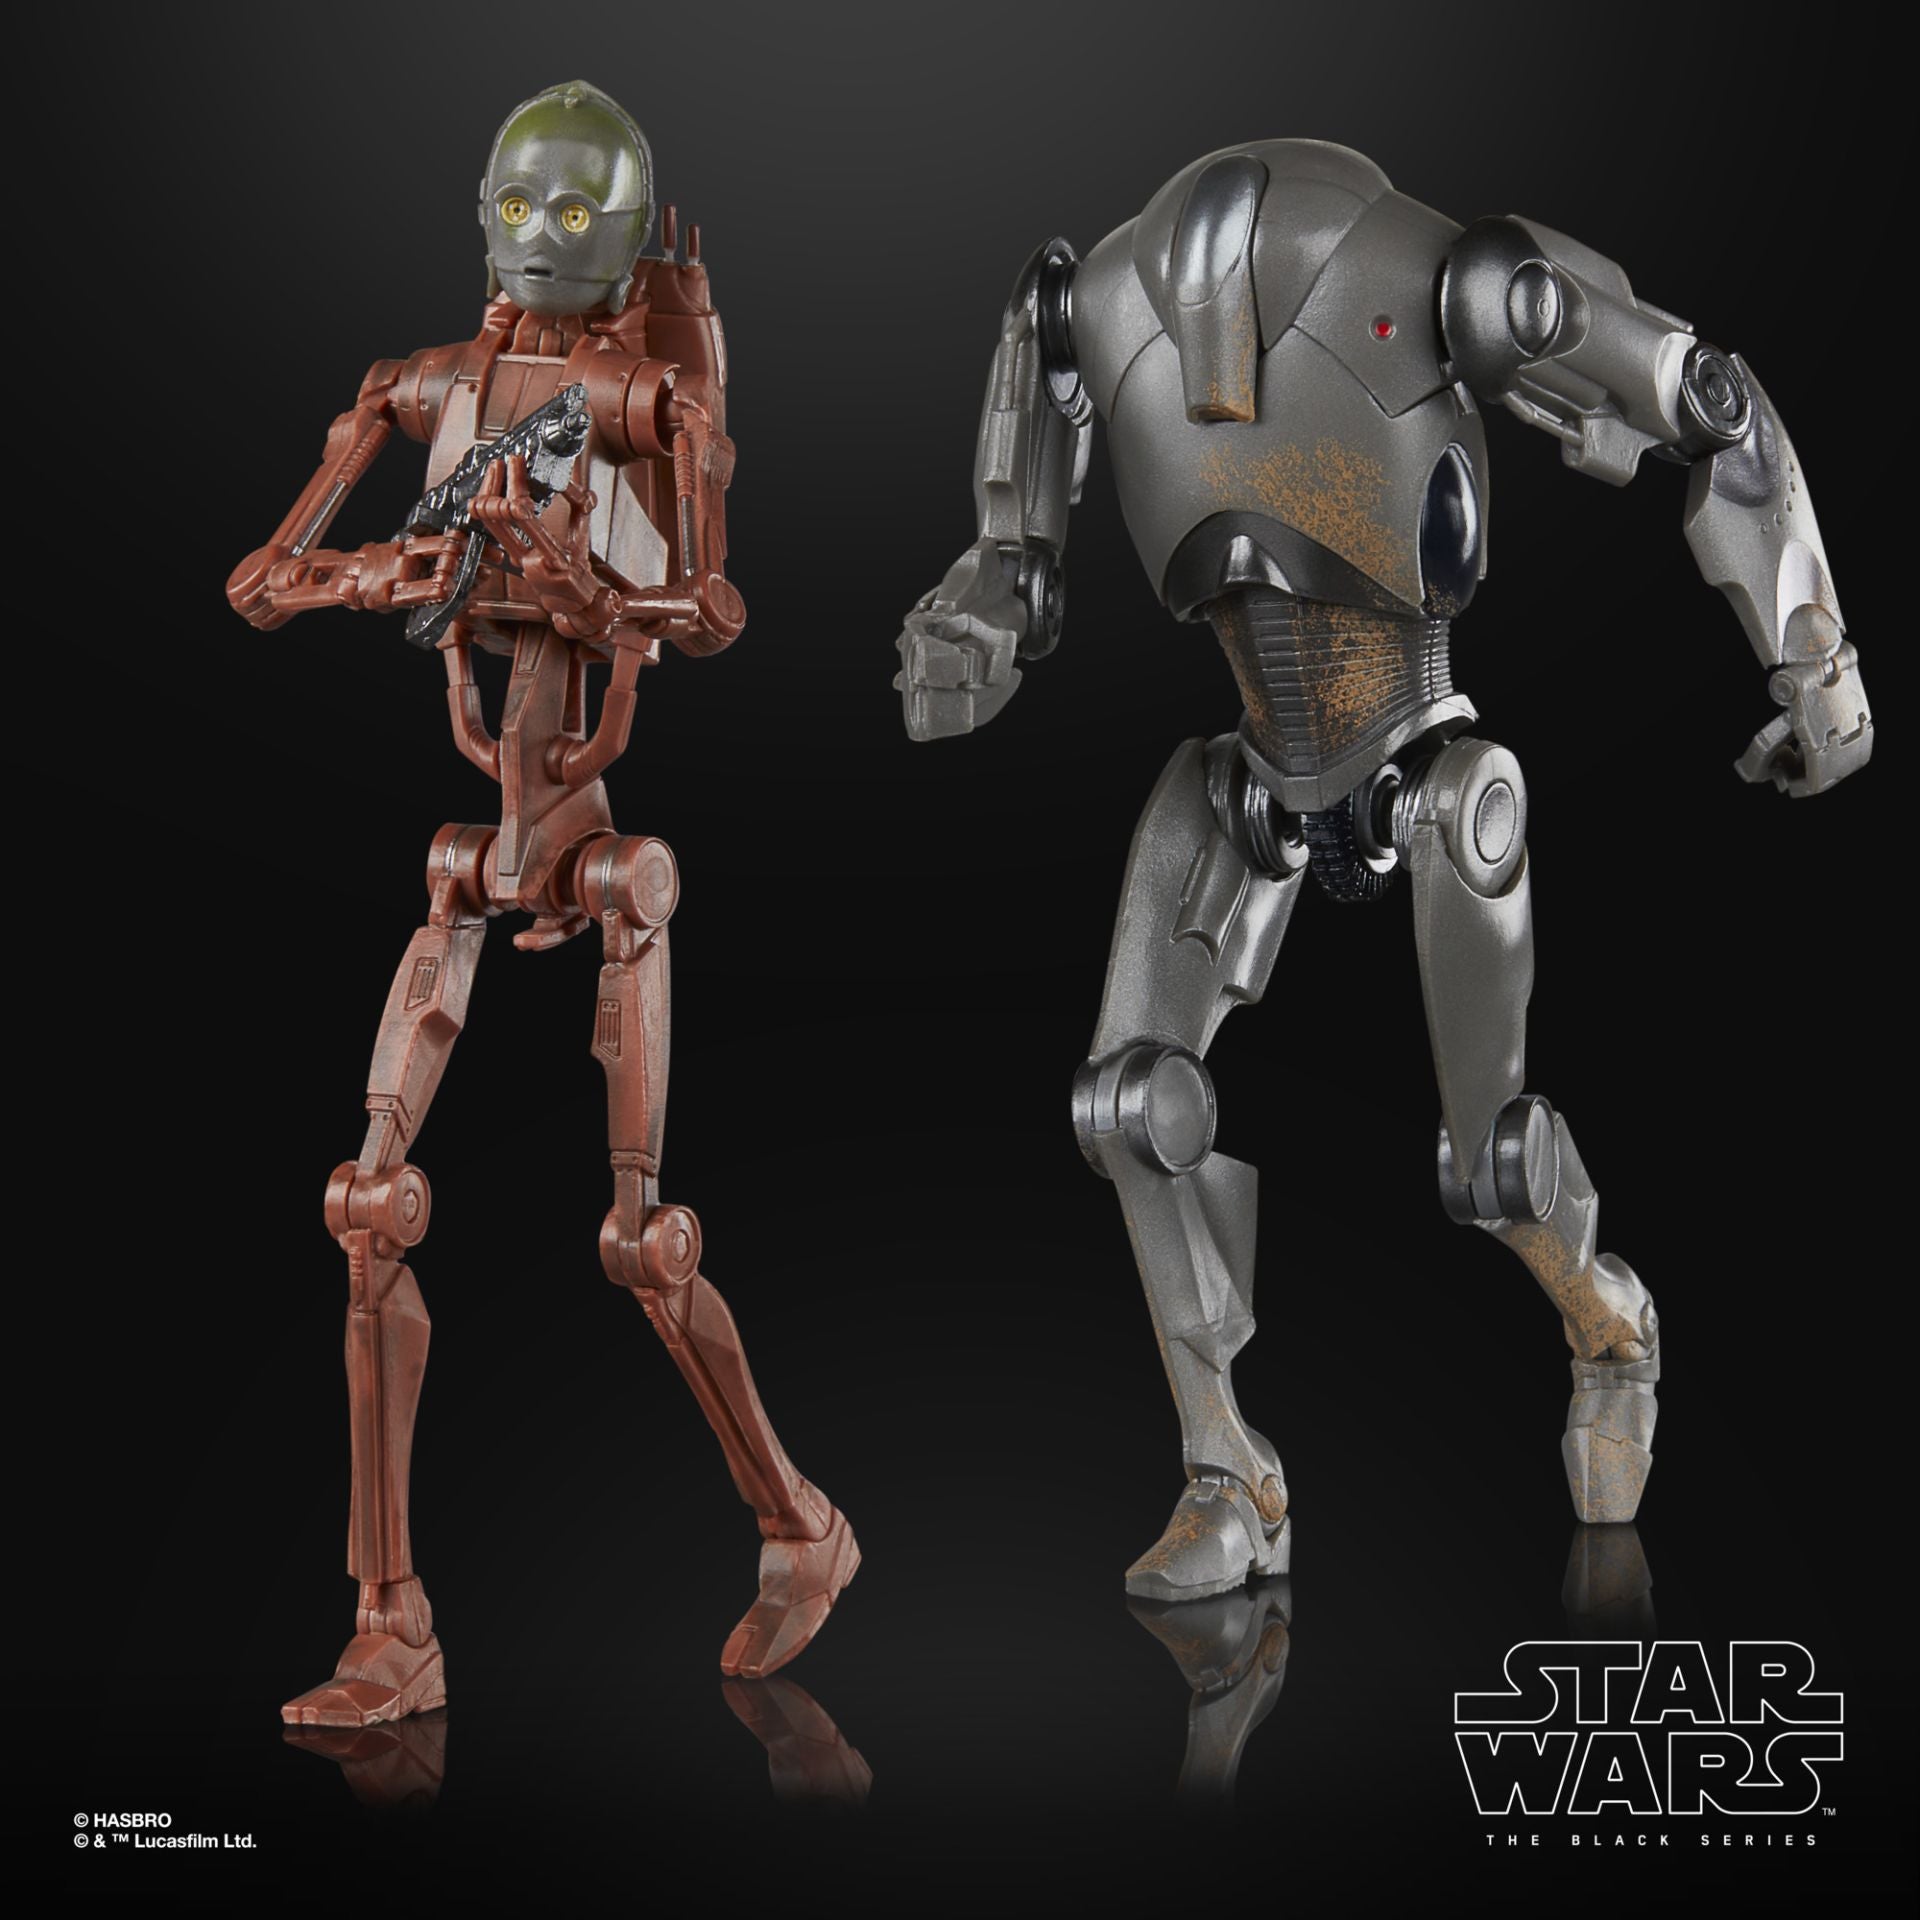 Star Wars The Black Series Attack Of The Clones C-3P0 (B1 Battle Droid Body) & Super Battle Droid Two Pack Hasbro